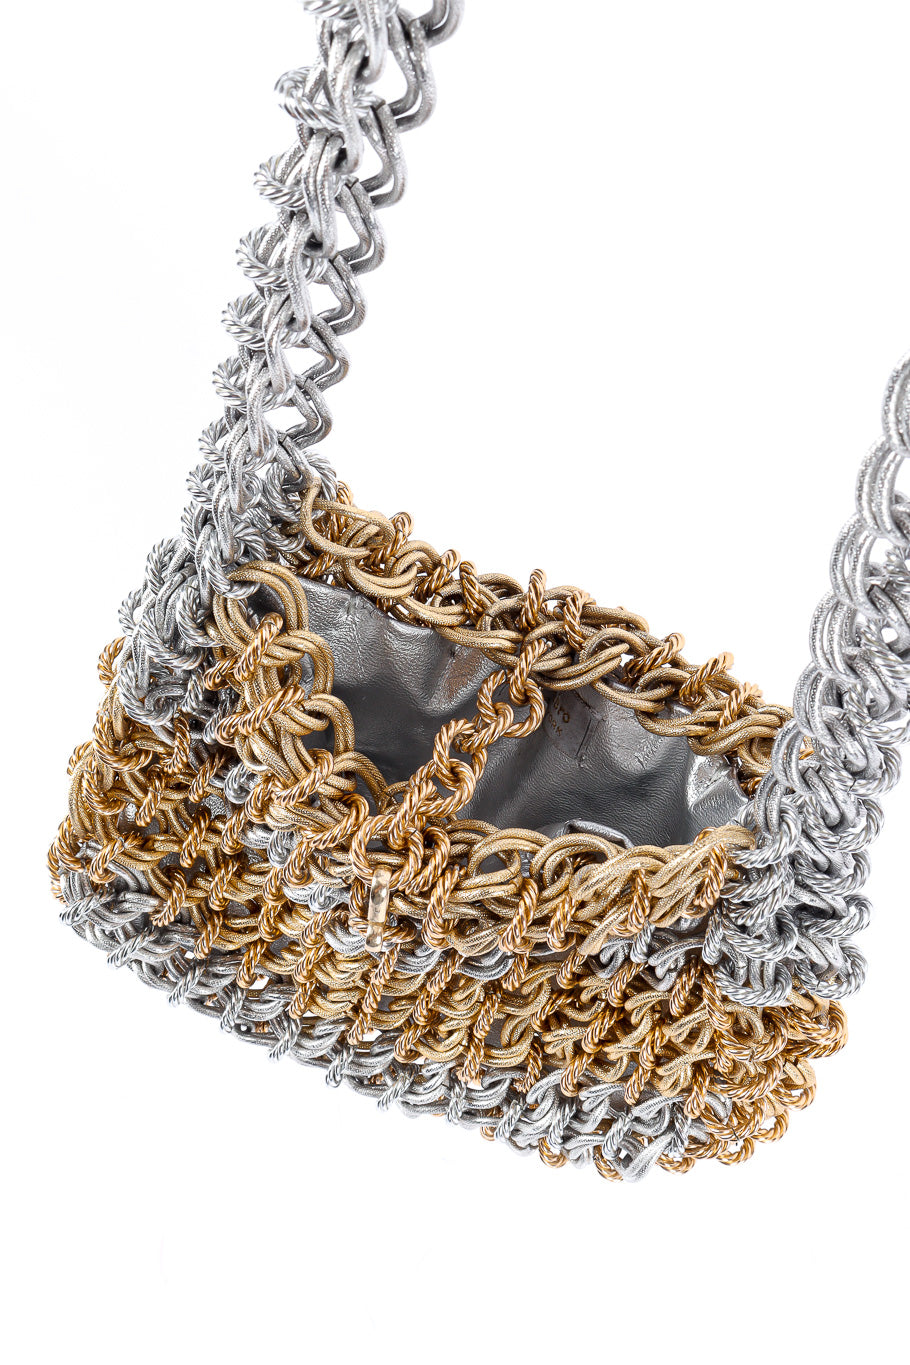 Chainlink shoulder bag by Raoul Calabro flat lay from above hanging @recessla